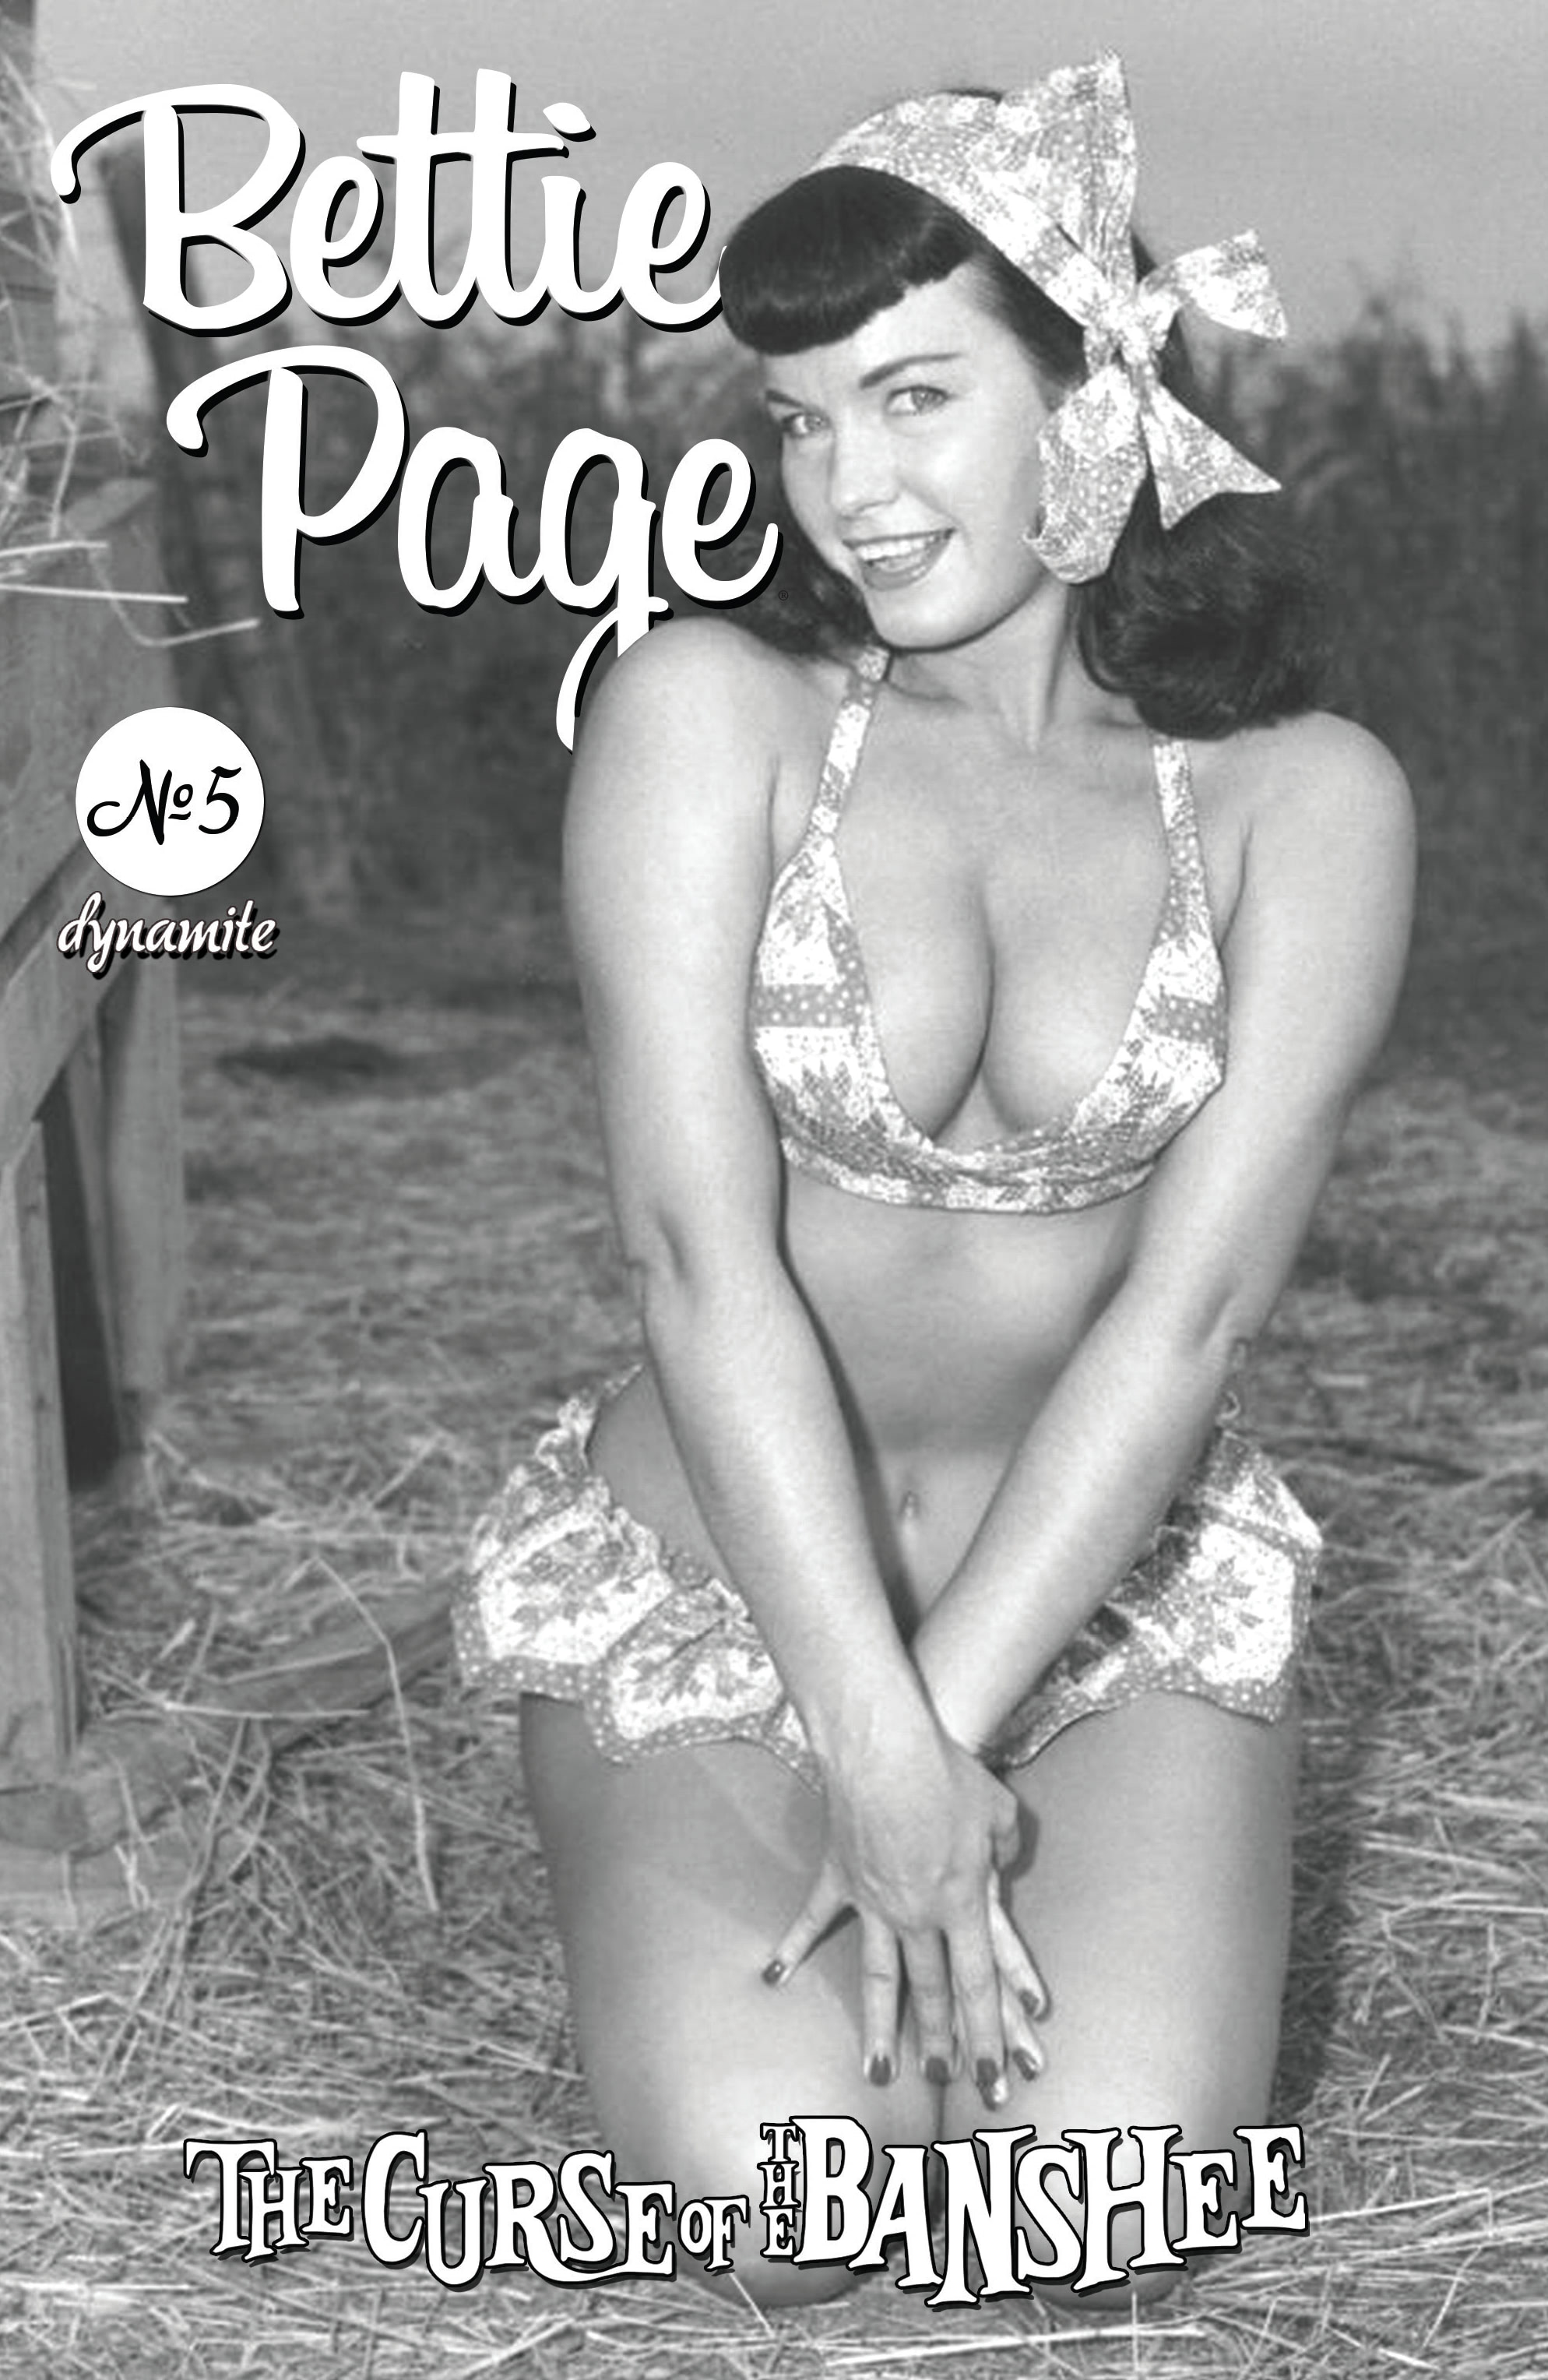 Read online Bettie Page & The Curse of the Banshee comic -  Issue #5 - 5